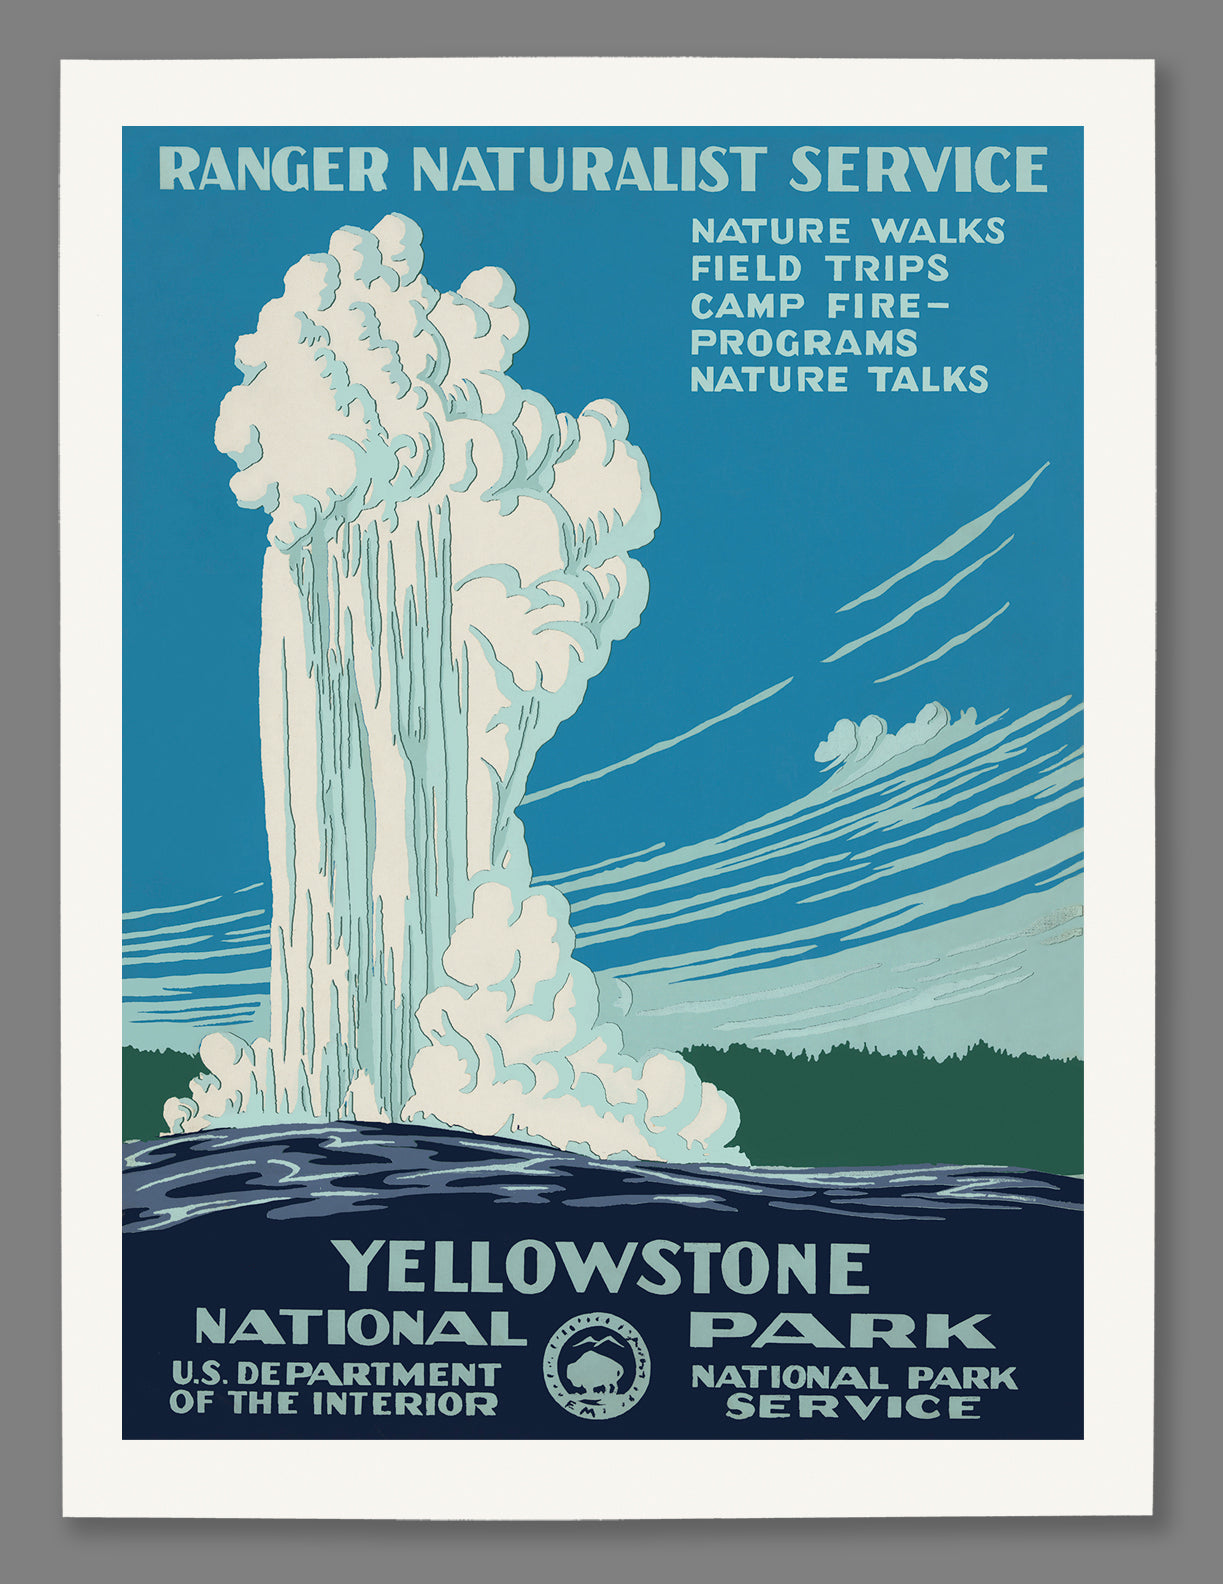 A paper print reproduction of a vintage poster for Yellowstone National Park